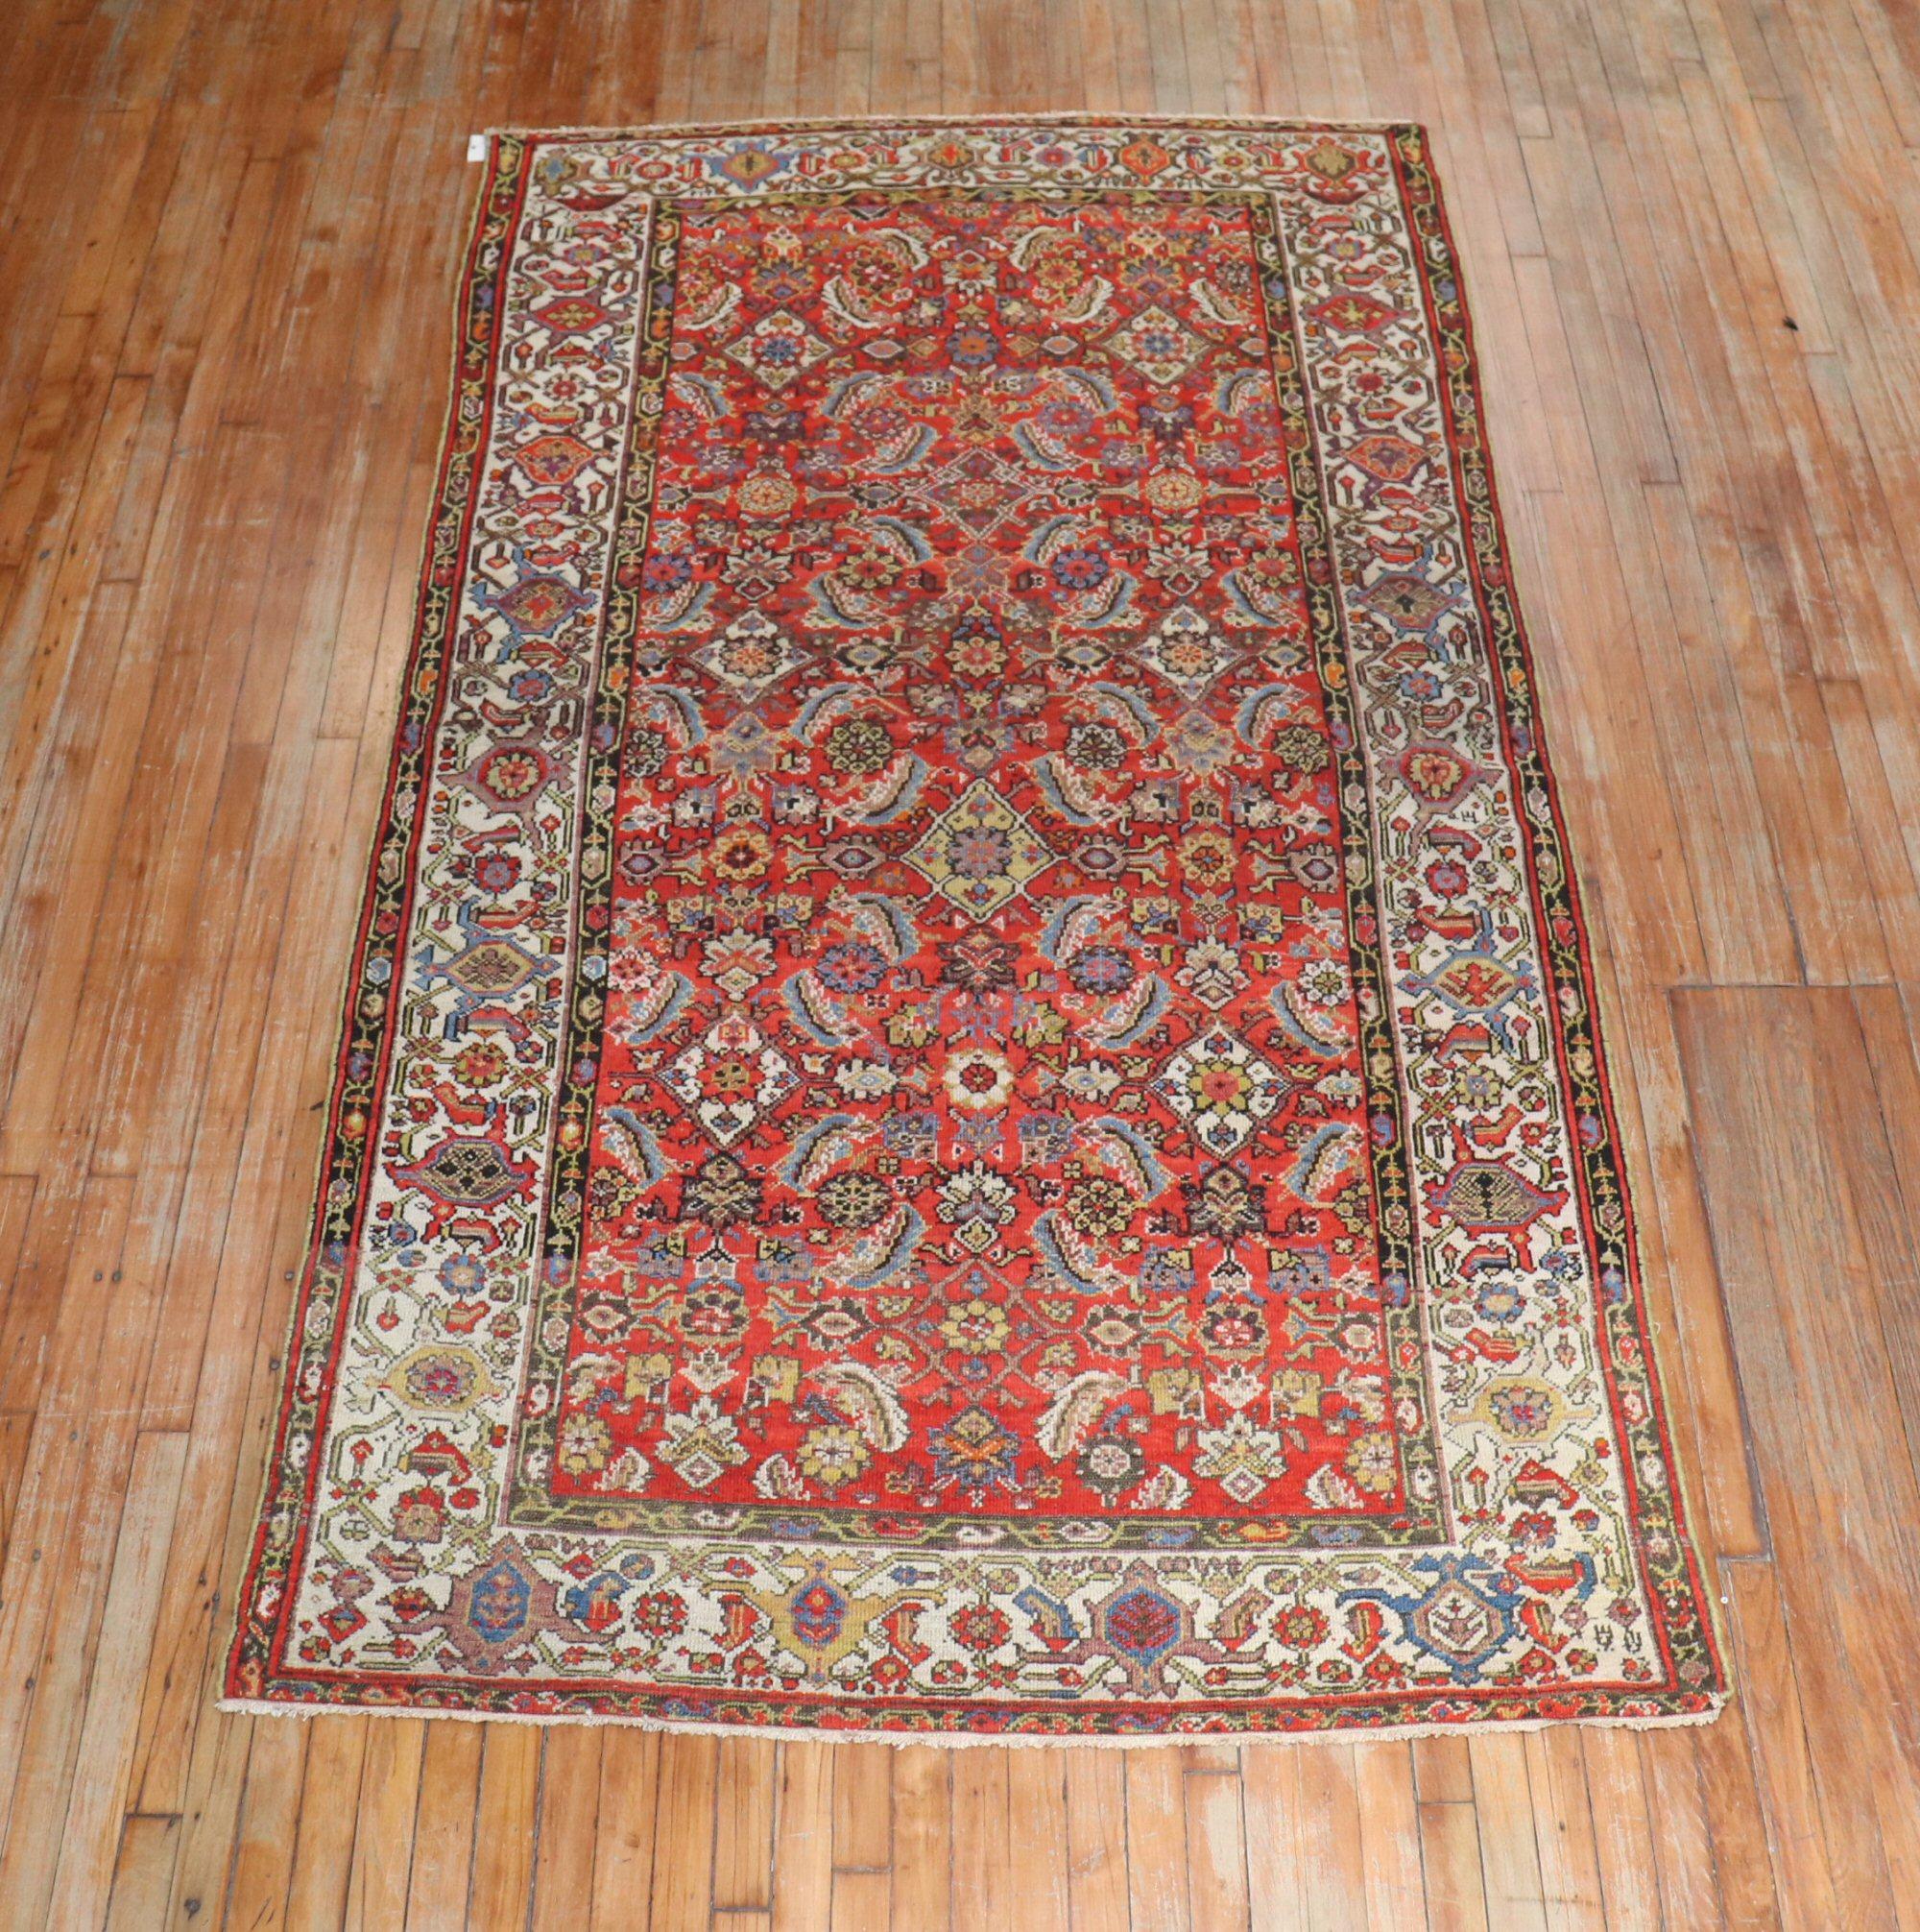 An intermediate size colorful Persian Malayer rug from the early 20th century.

Measures: 4'11